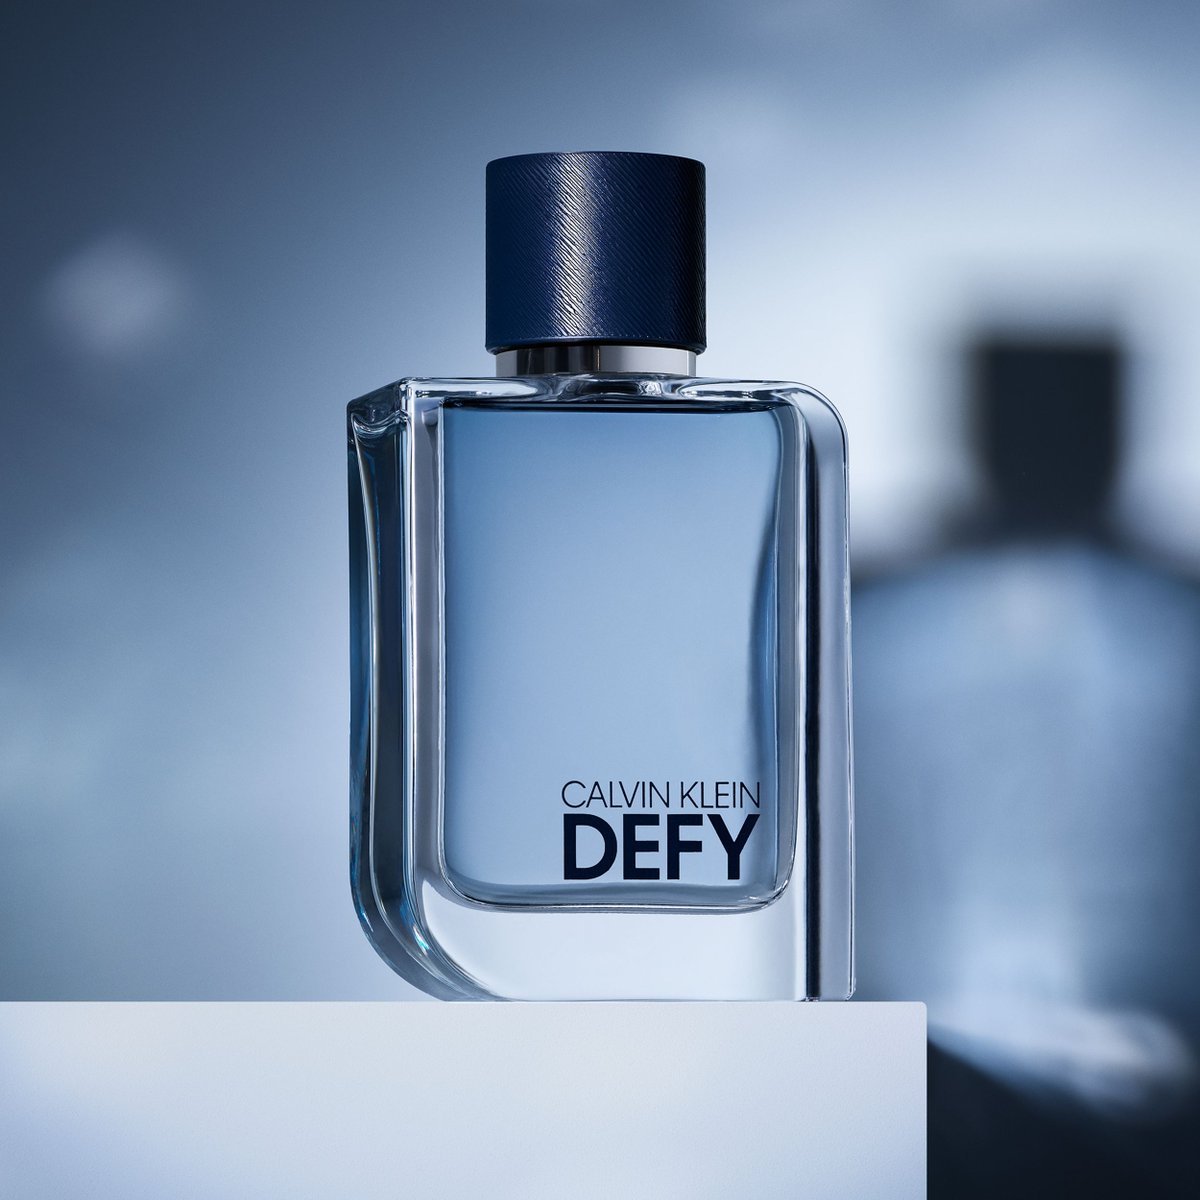 Father's Day will be here quicker than you think, so make sure you treat the man in your life to a fragrance that he deserves ✨ Calvin Klein Defy is a citrus blend with bergamot, lavender absolute & vetiver oil 😍 Save on selected Fragrance: shorturl.at/gzLPv